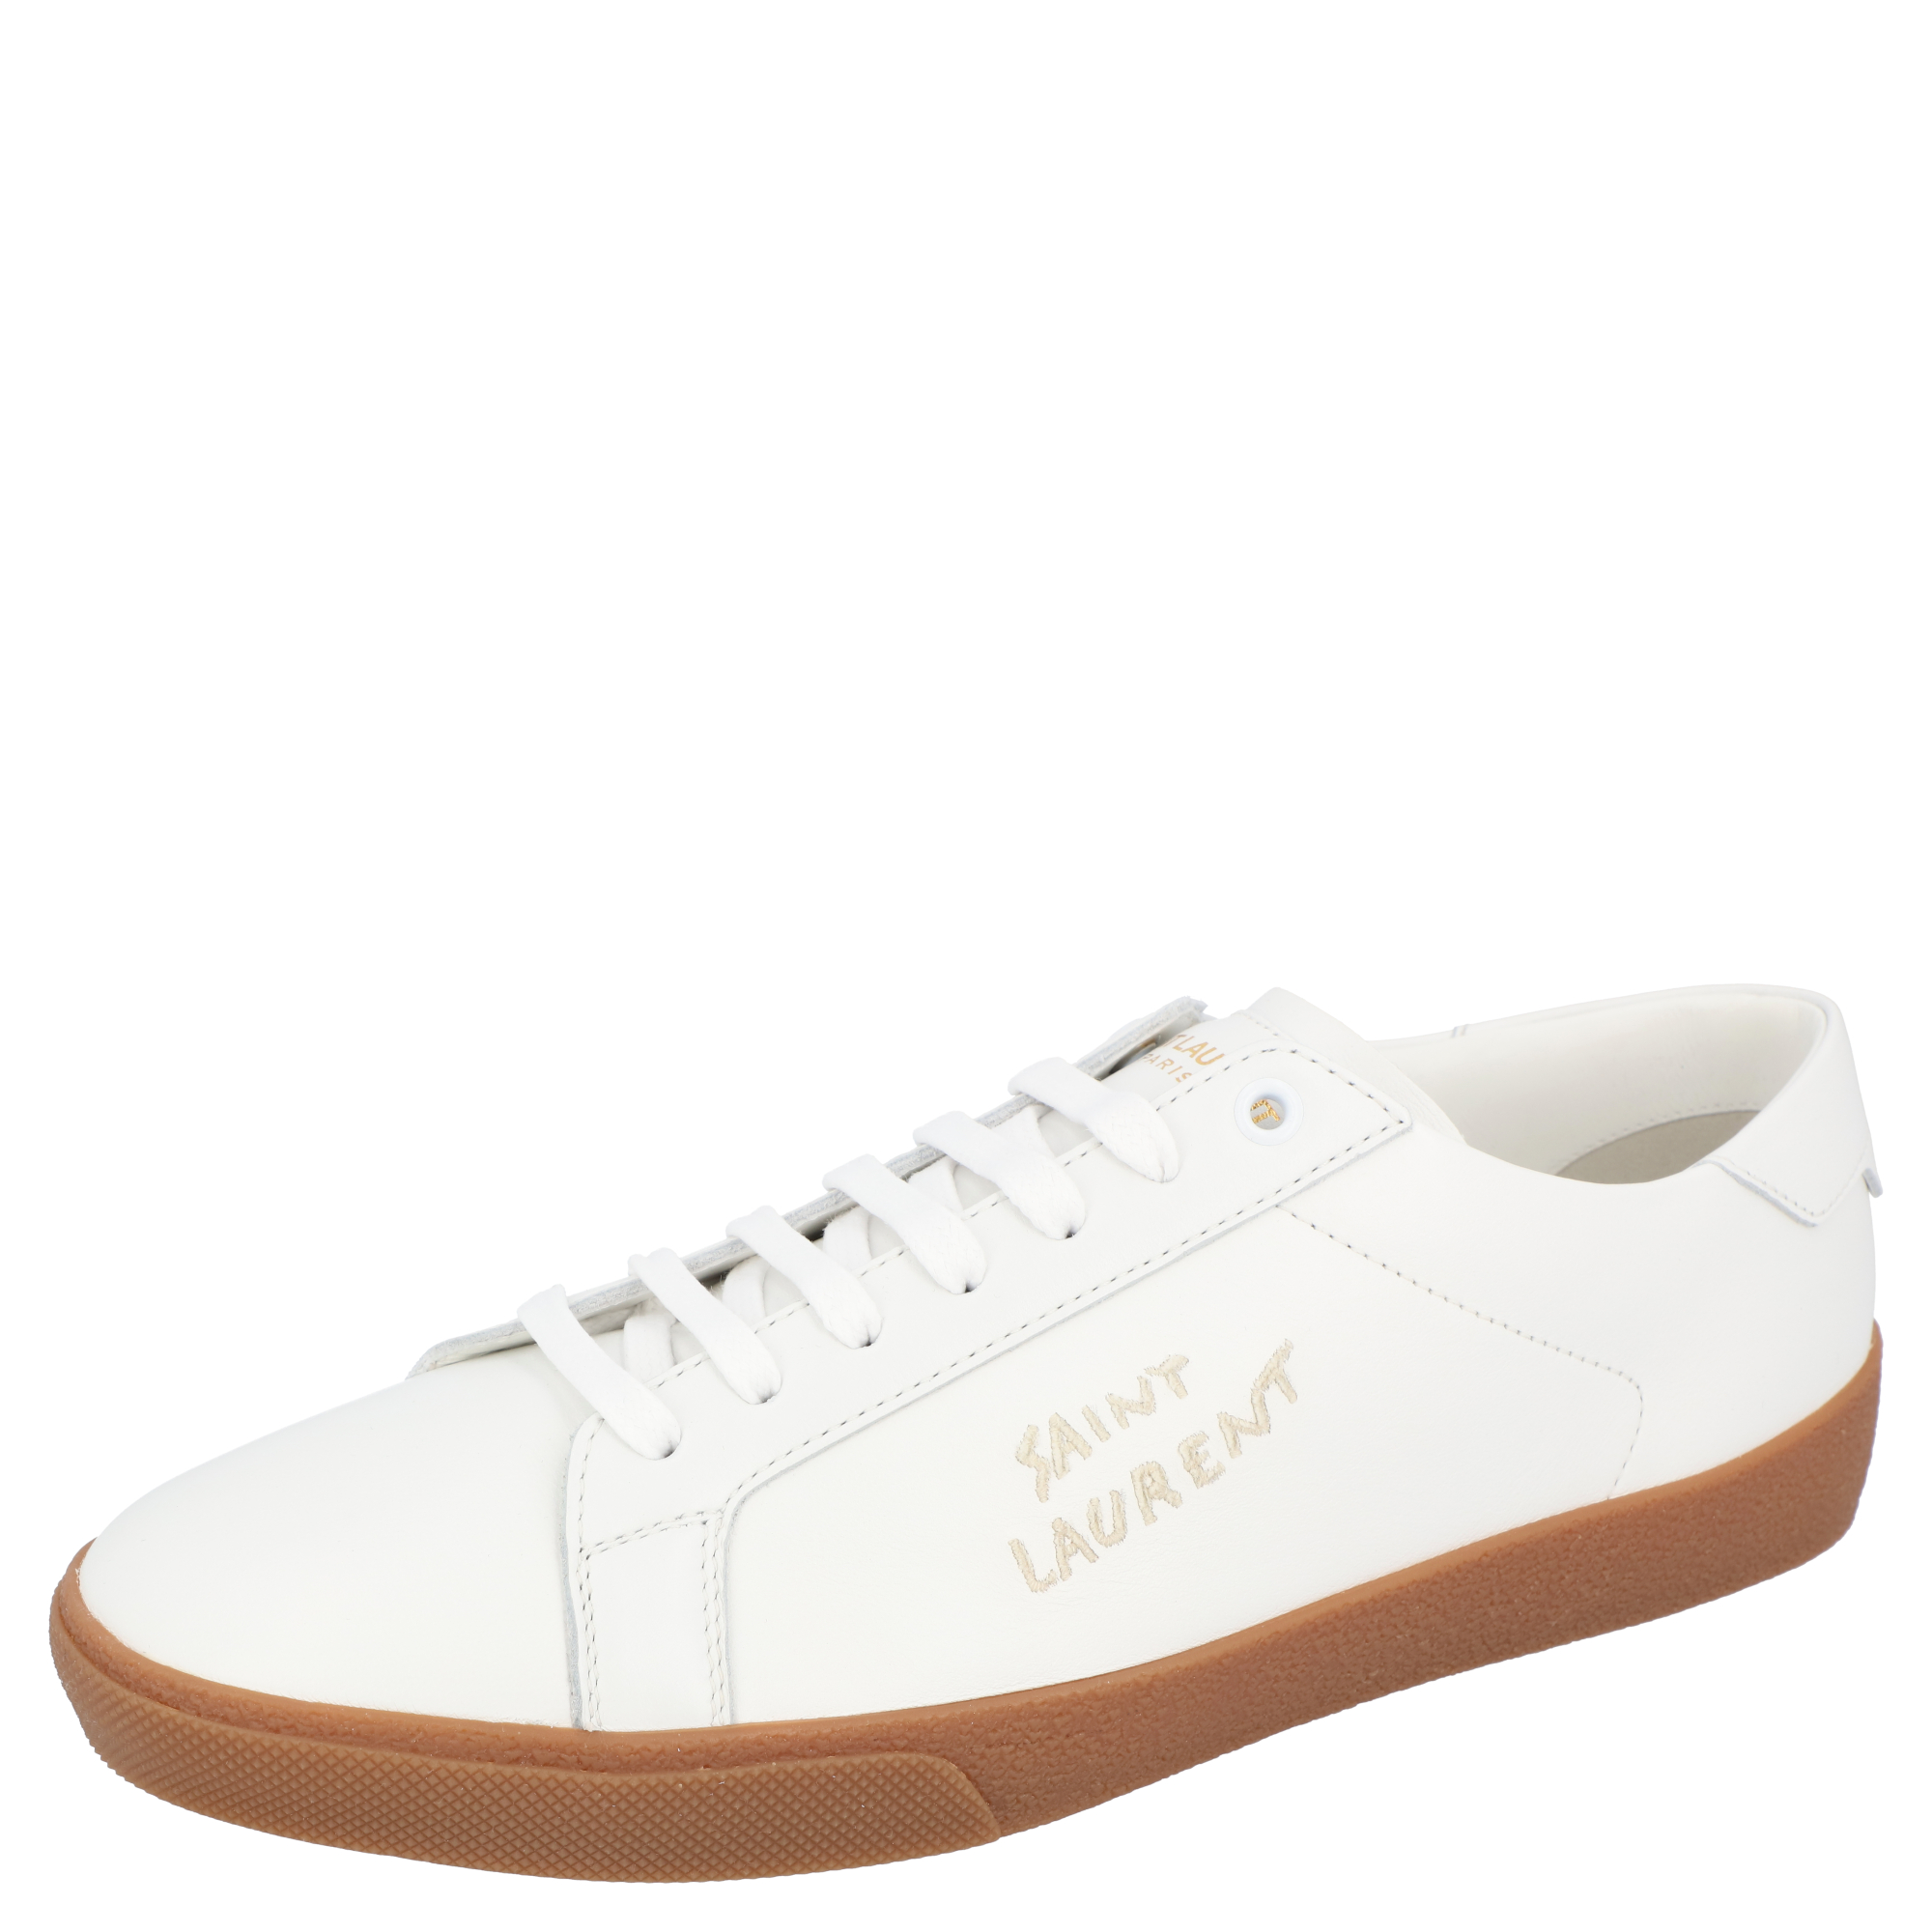 Saint Laurent White Leather SL/06 Embroidered Court Classic Sneakers Size EU 42